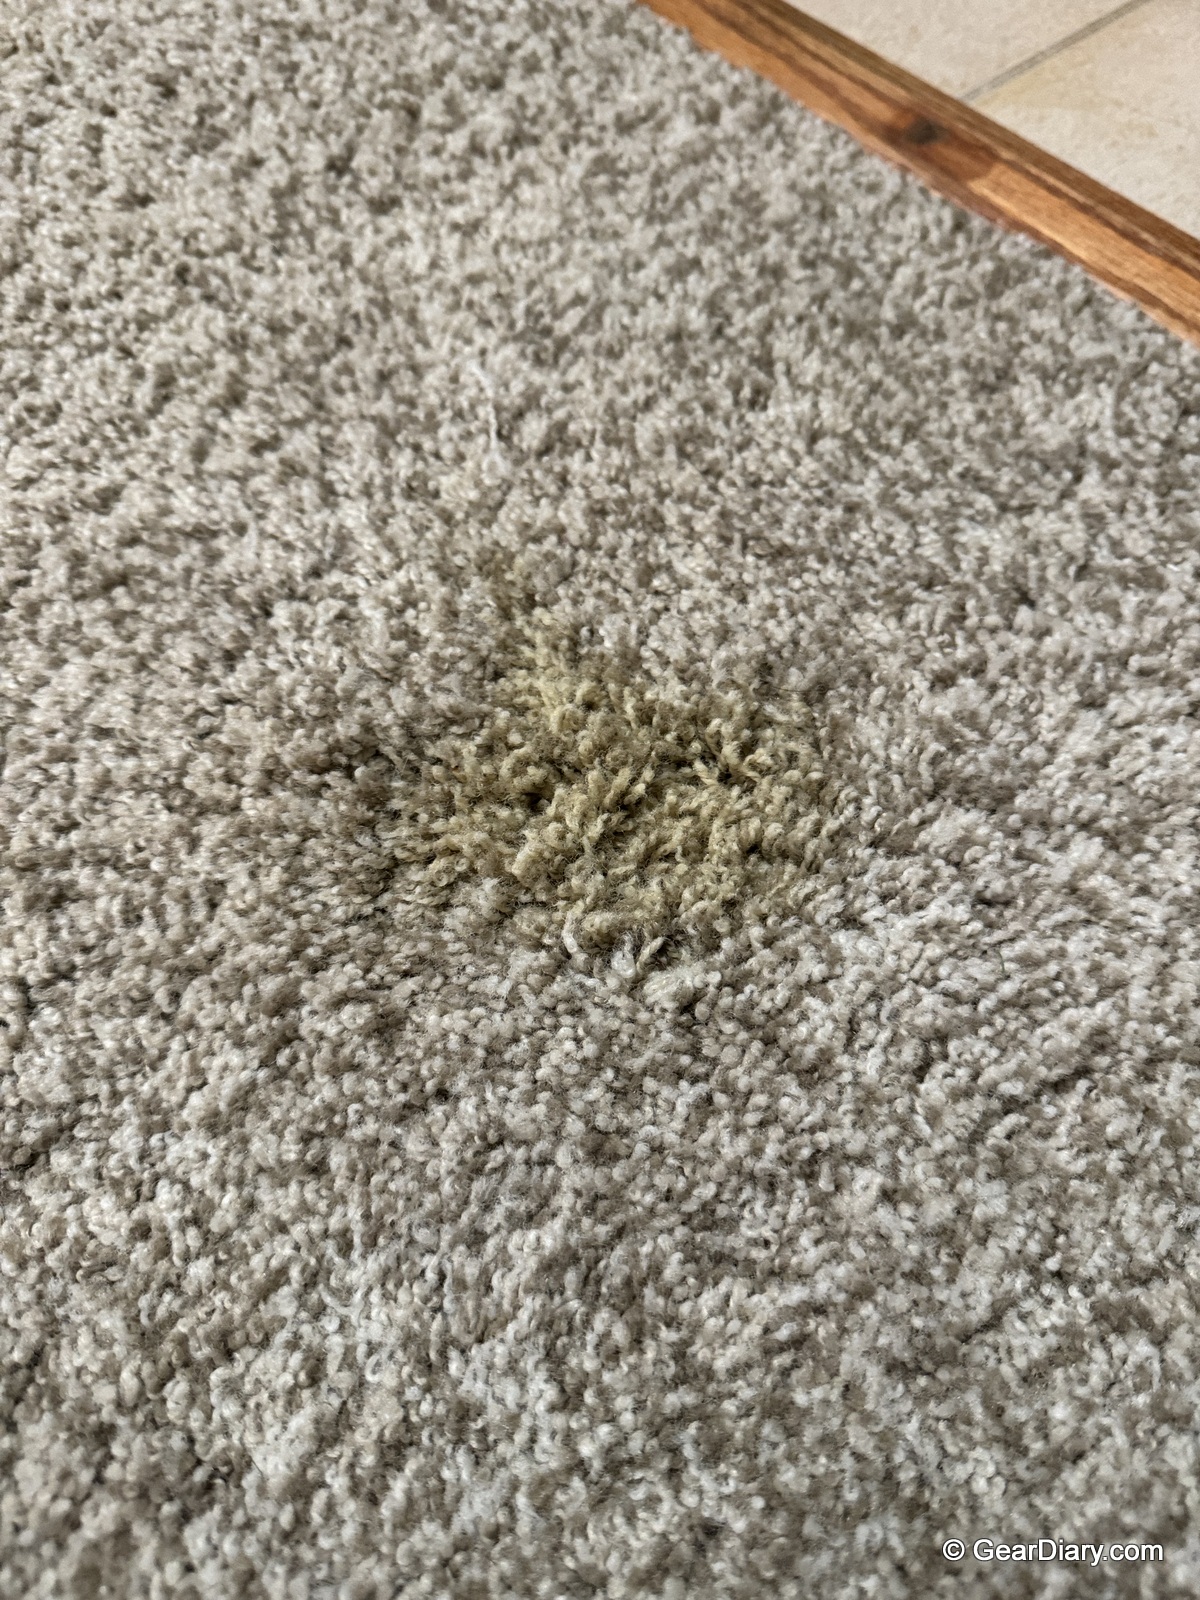 Urine stain left on author's carpet by his dog.